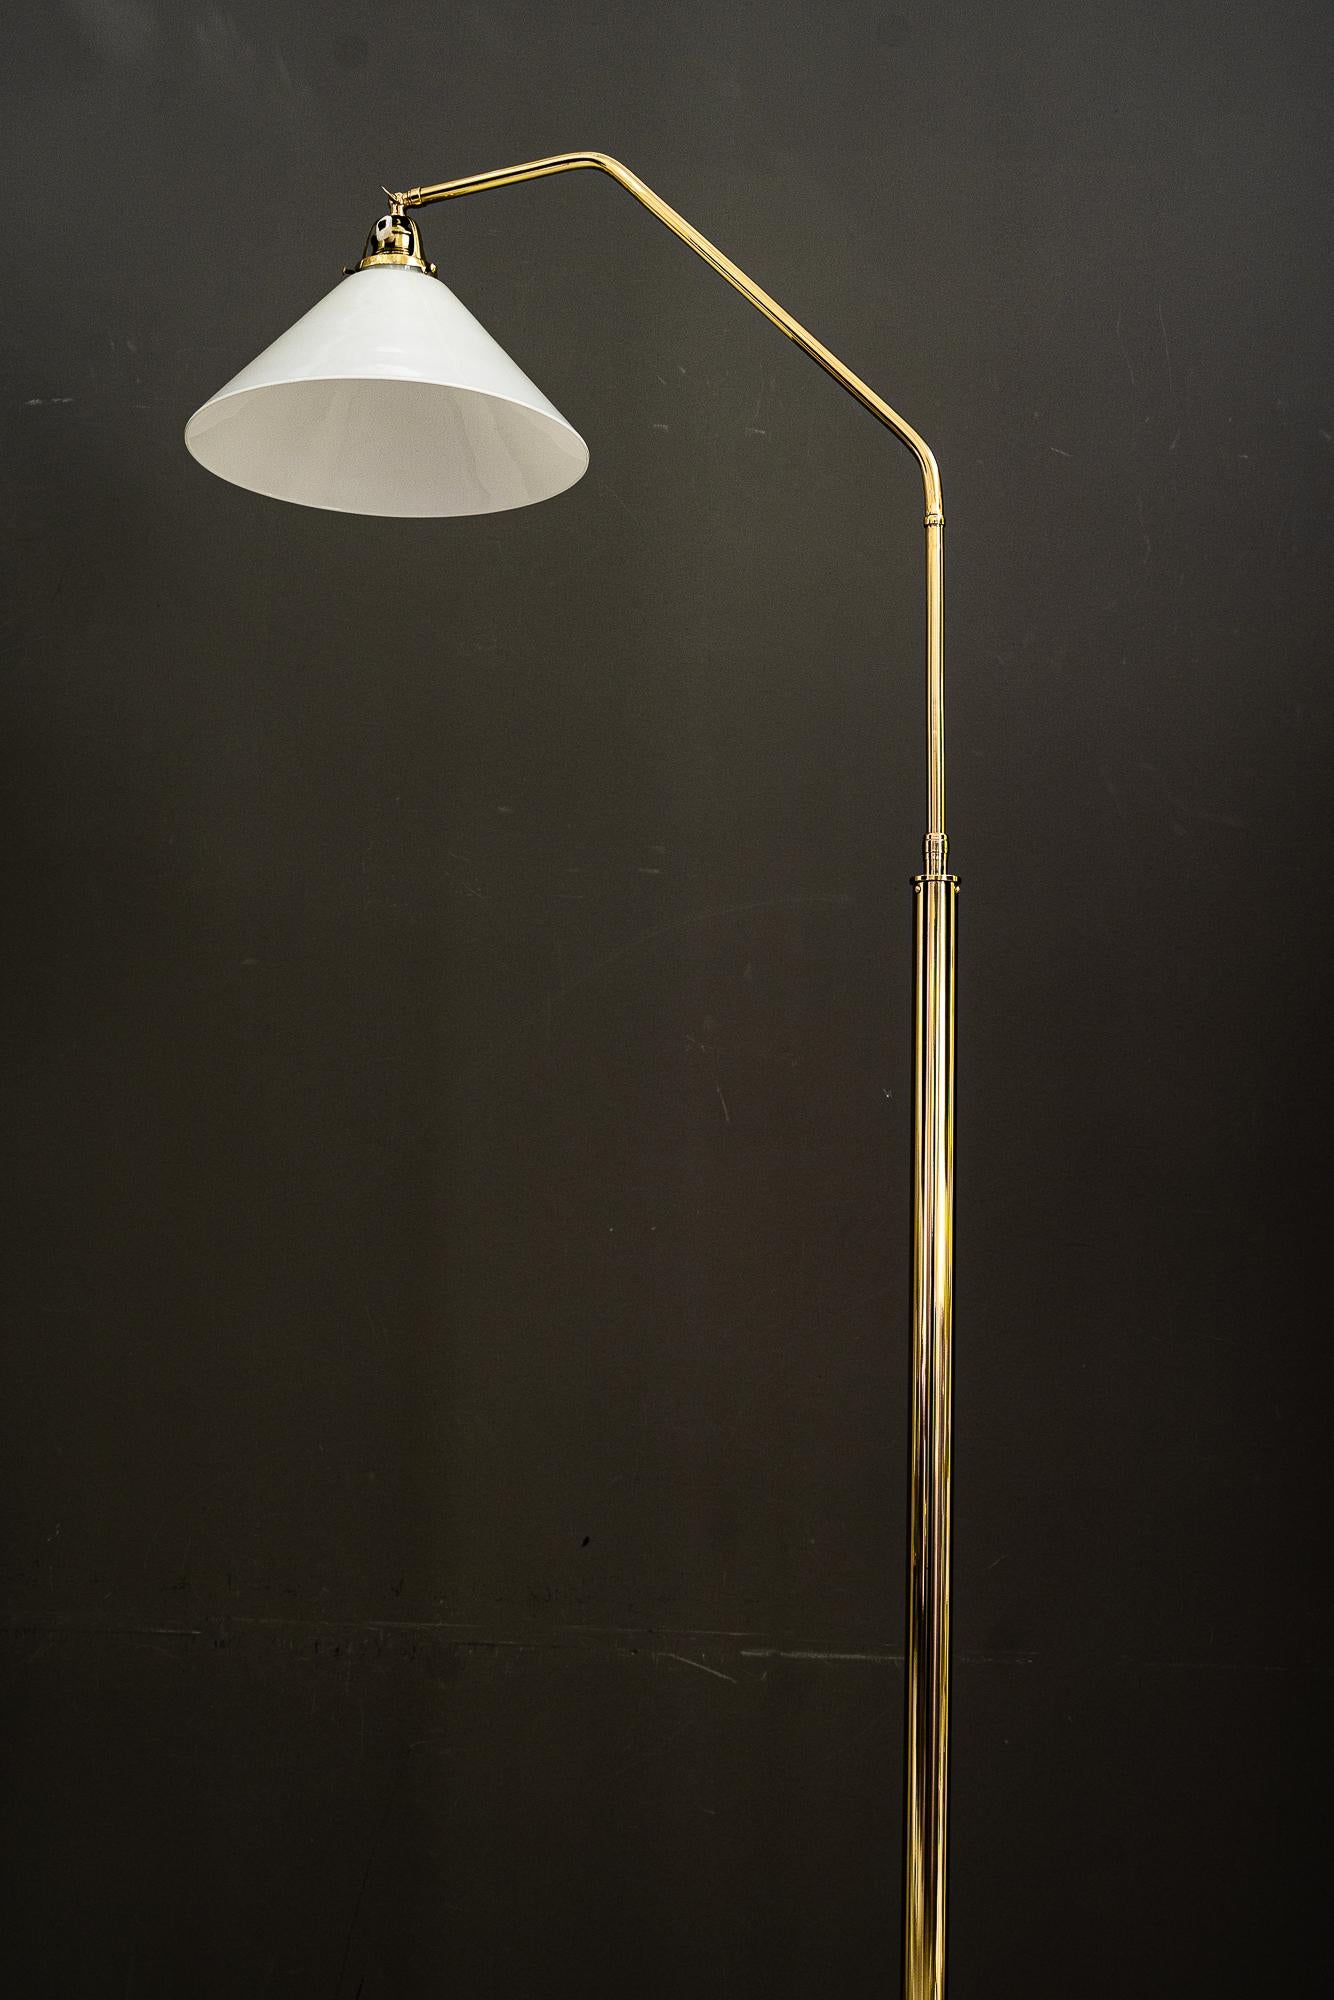 Adjustable art deco floor lamp with glass shade around 1920s
Brass polished and stove enamelled
The height is adjustable from 148 cm up to 168 cm.